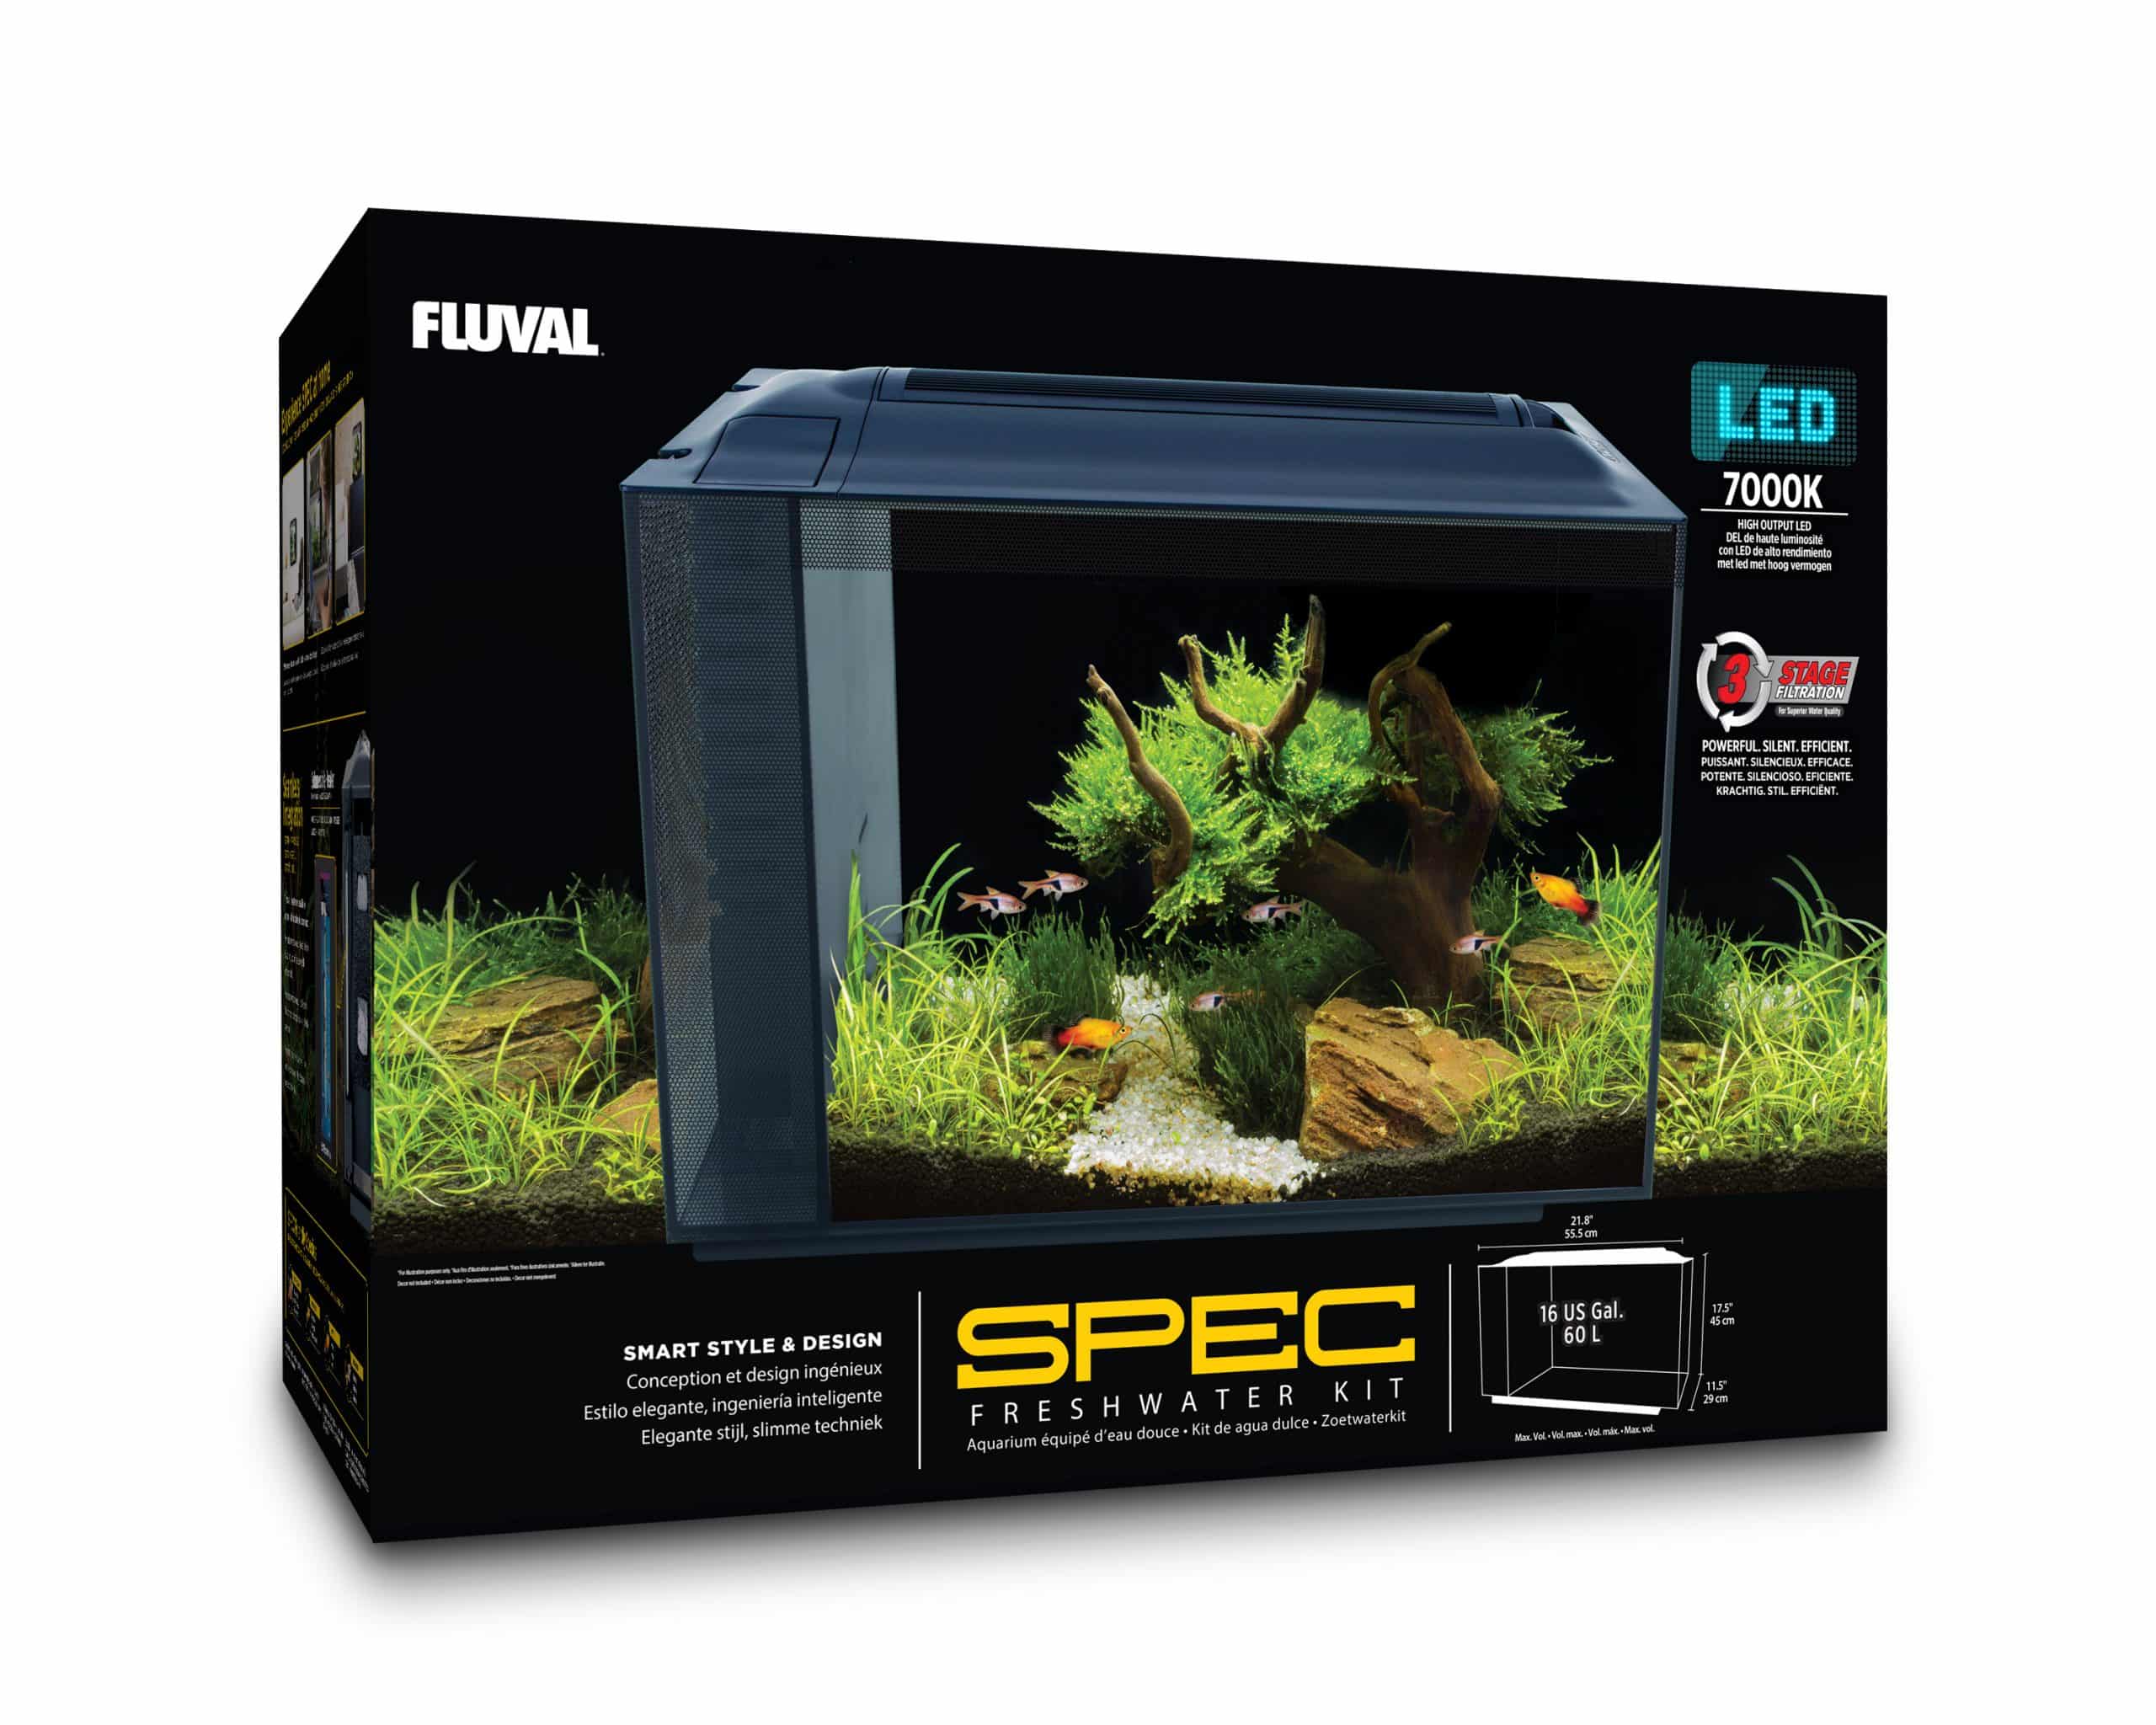 The all-new Fluval Spec, 16 US Gal / 60 L aquarium is equipped with efficient 3-stage filtration, but is set apart by a powerful 7000 K high-output LED that is seamlessly integrated into a new cleverly designed canopy, making it the brightest member of the Spec family in more ways than one!